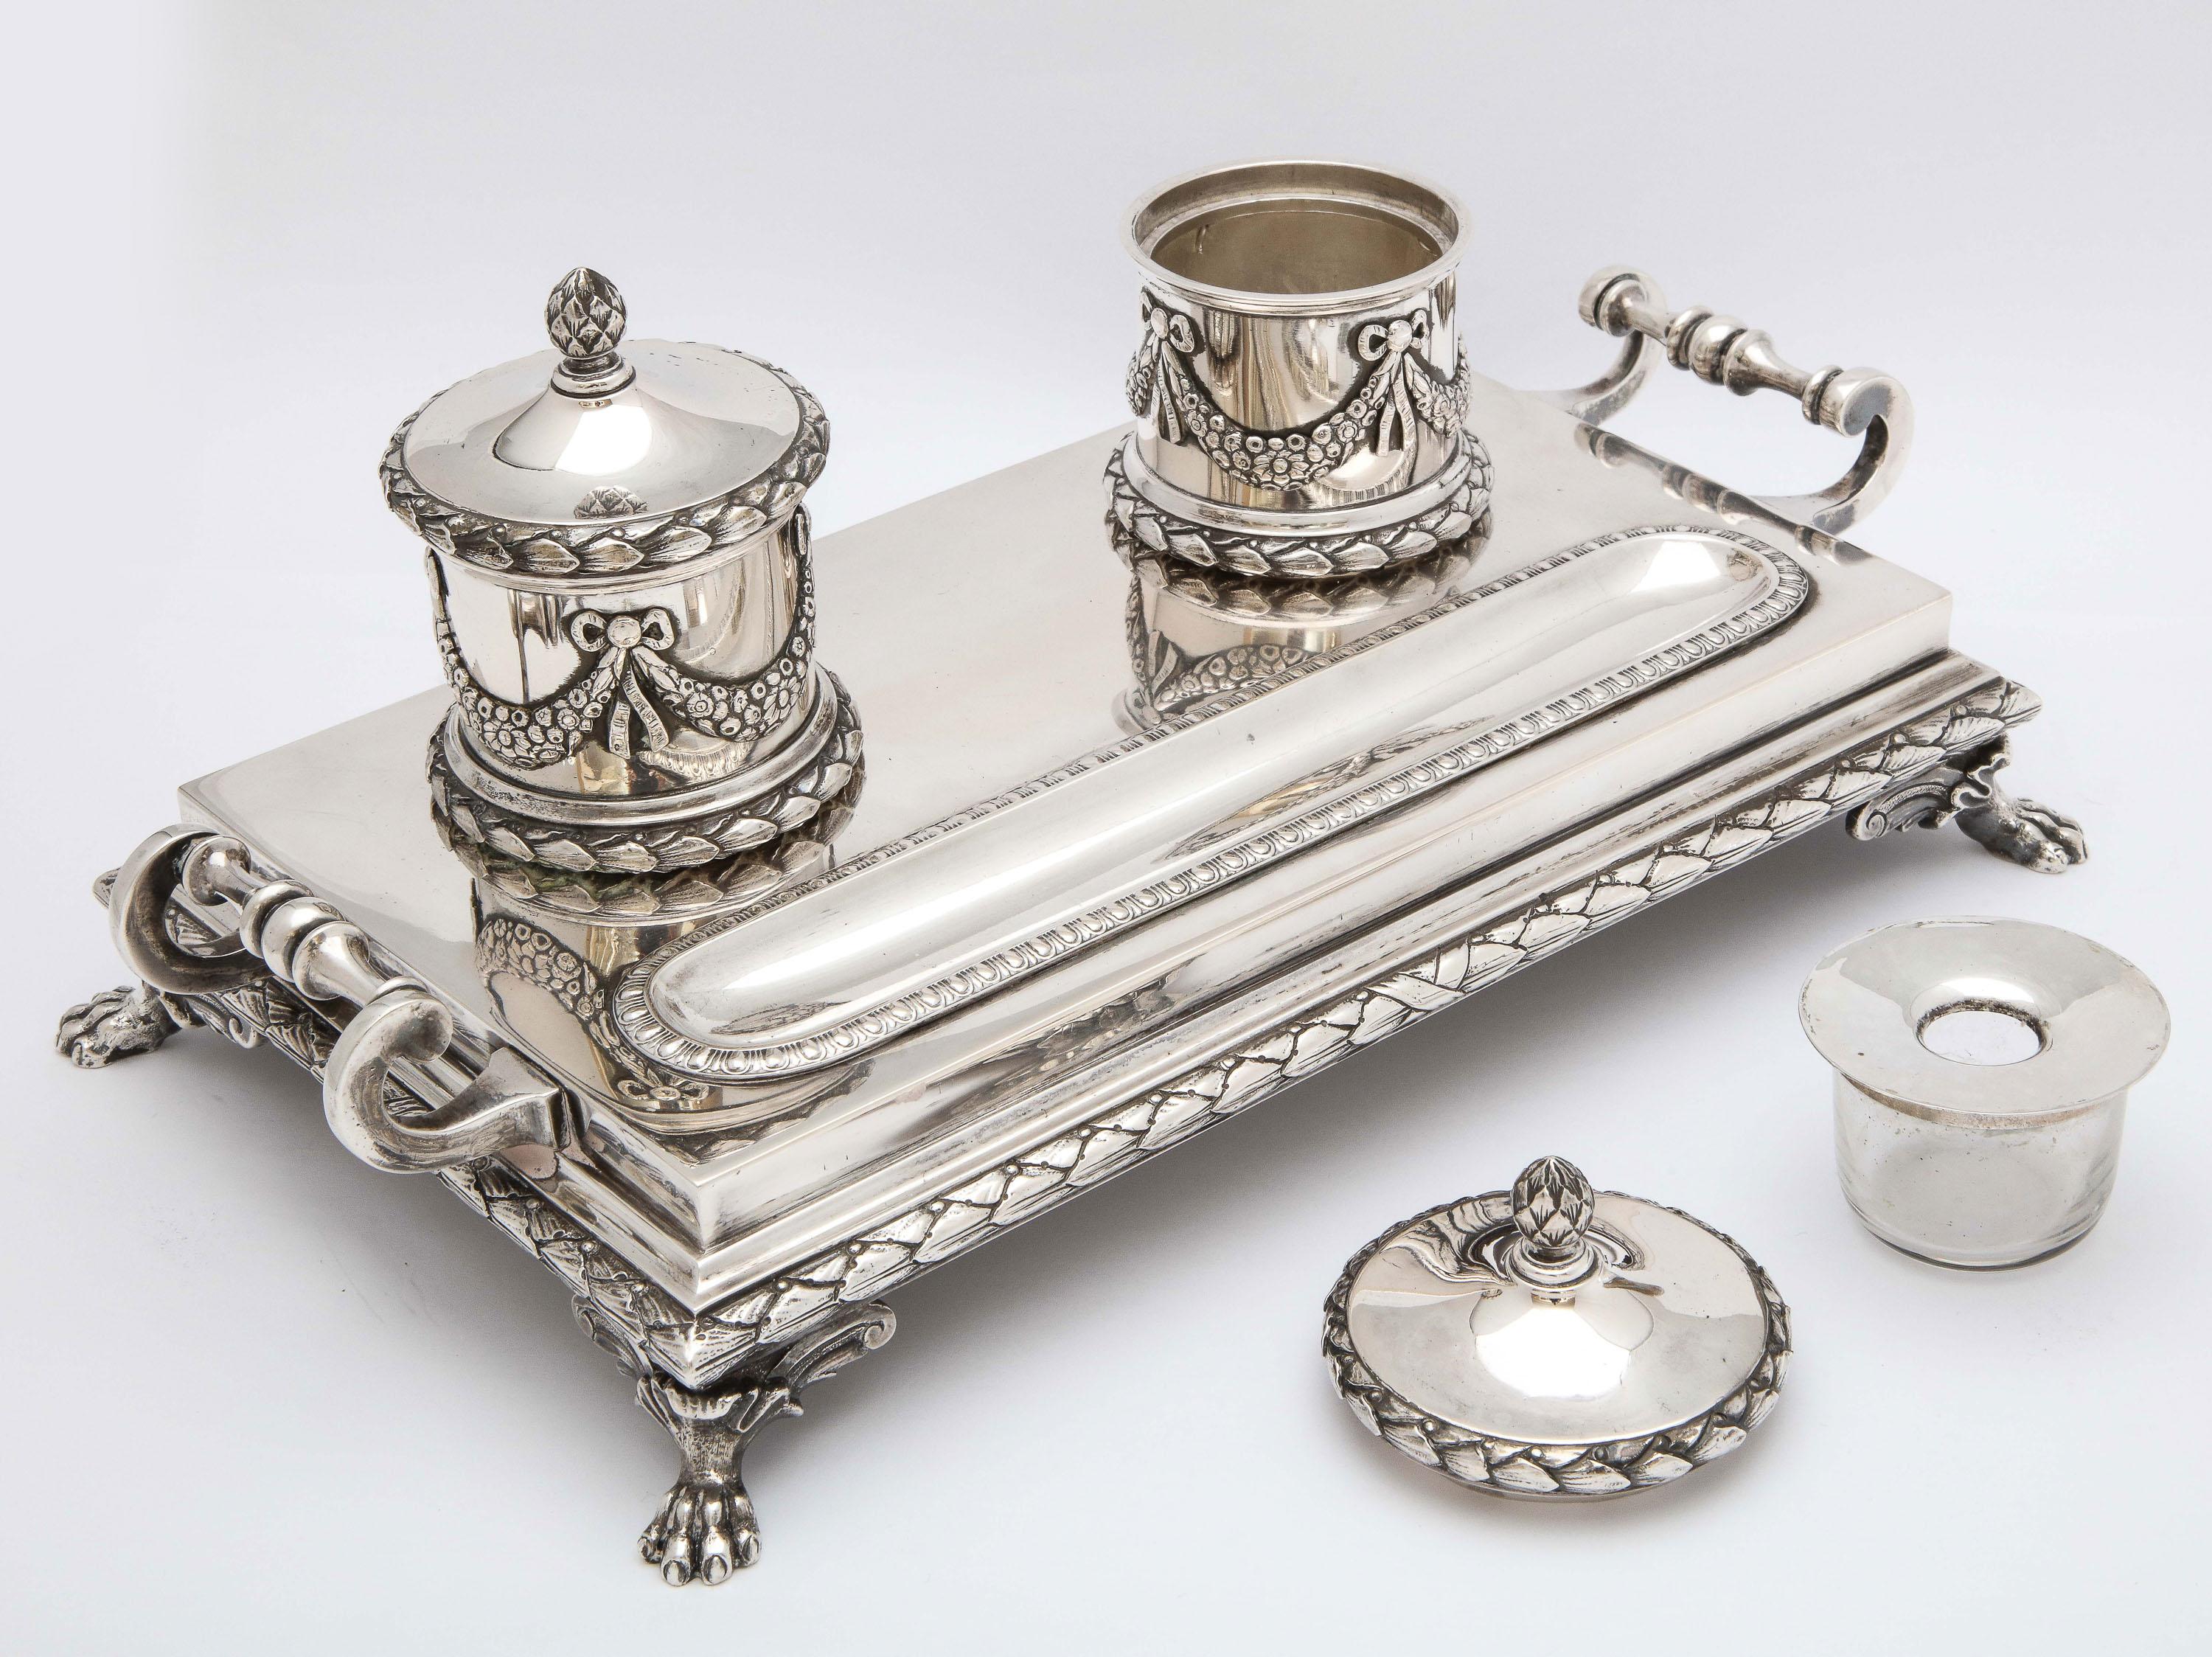 Neoclassical-Style Continental Silver '.800' Footed Double Inkstand by Dragstead For Sale 13